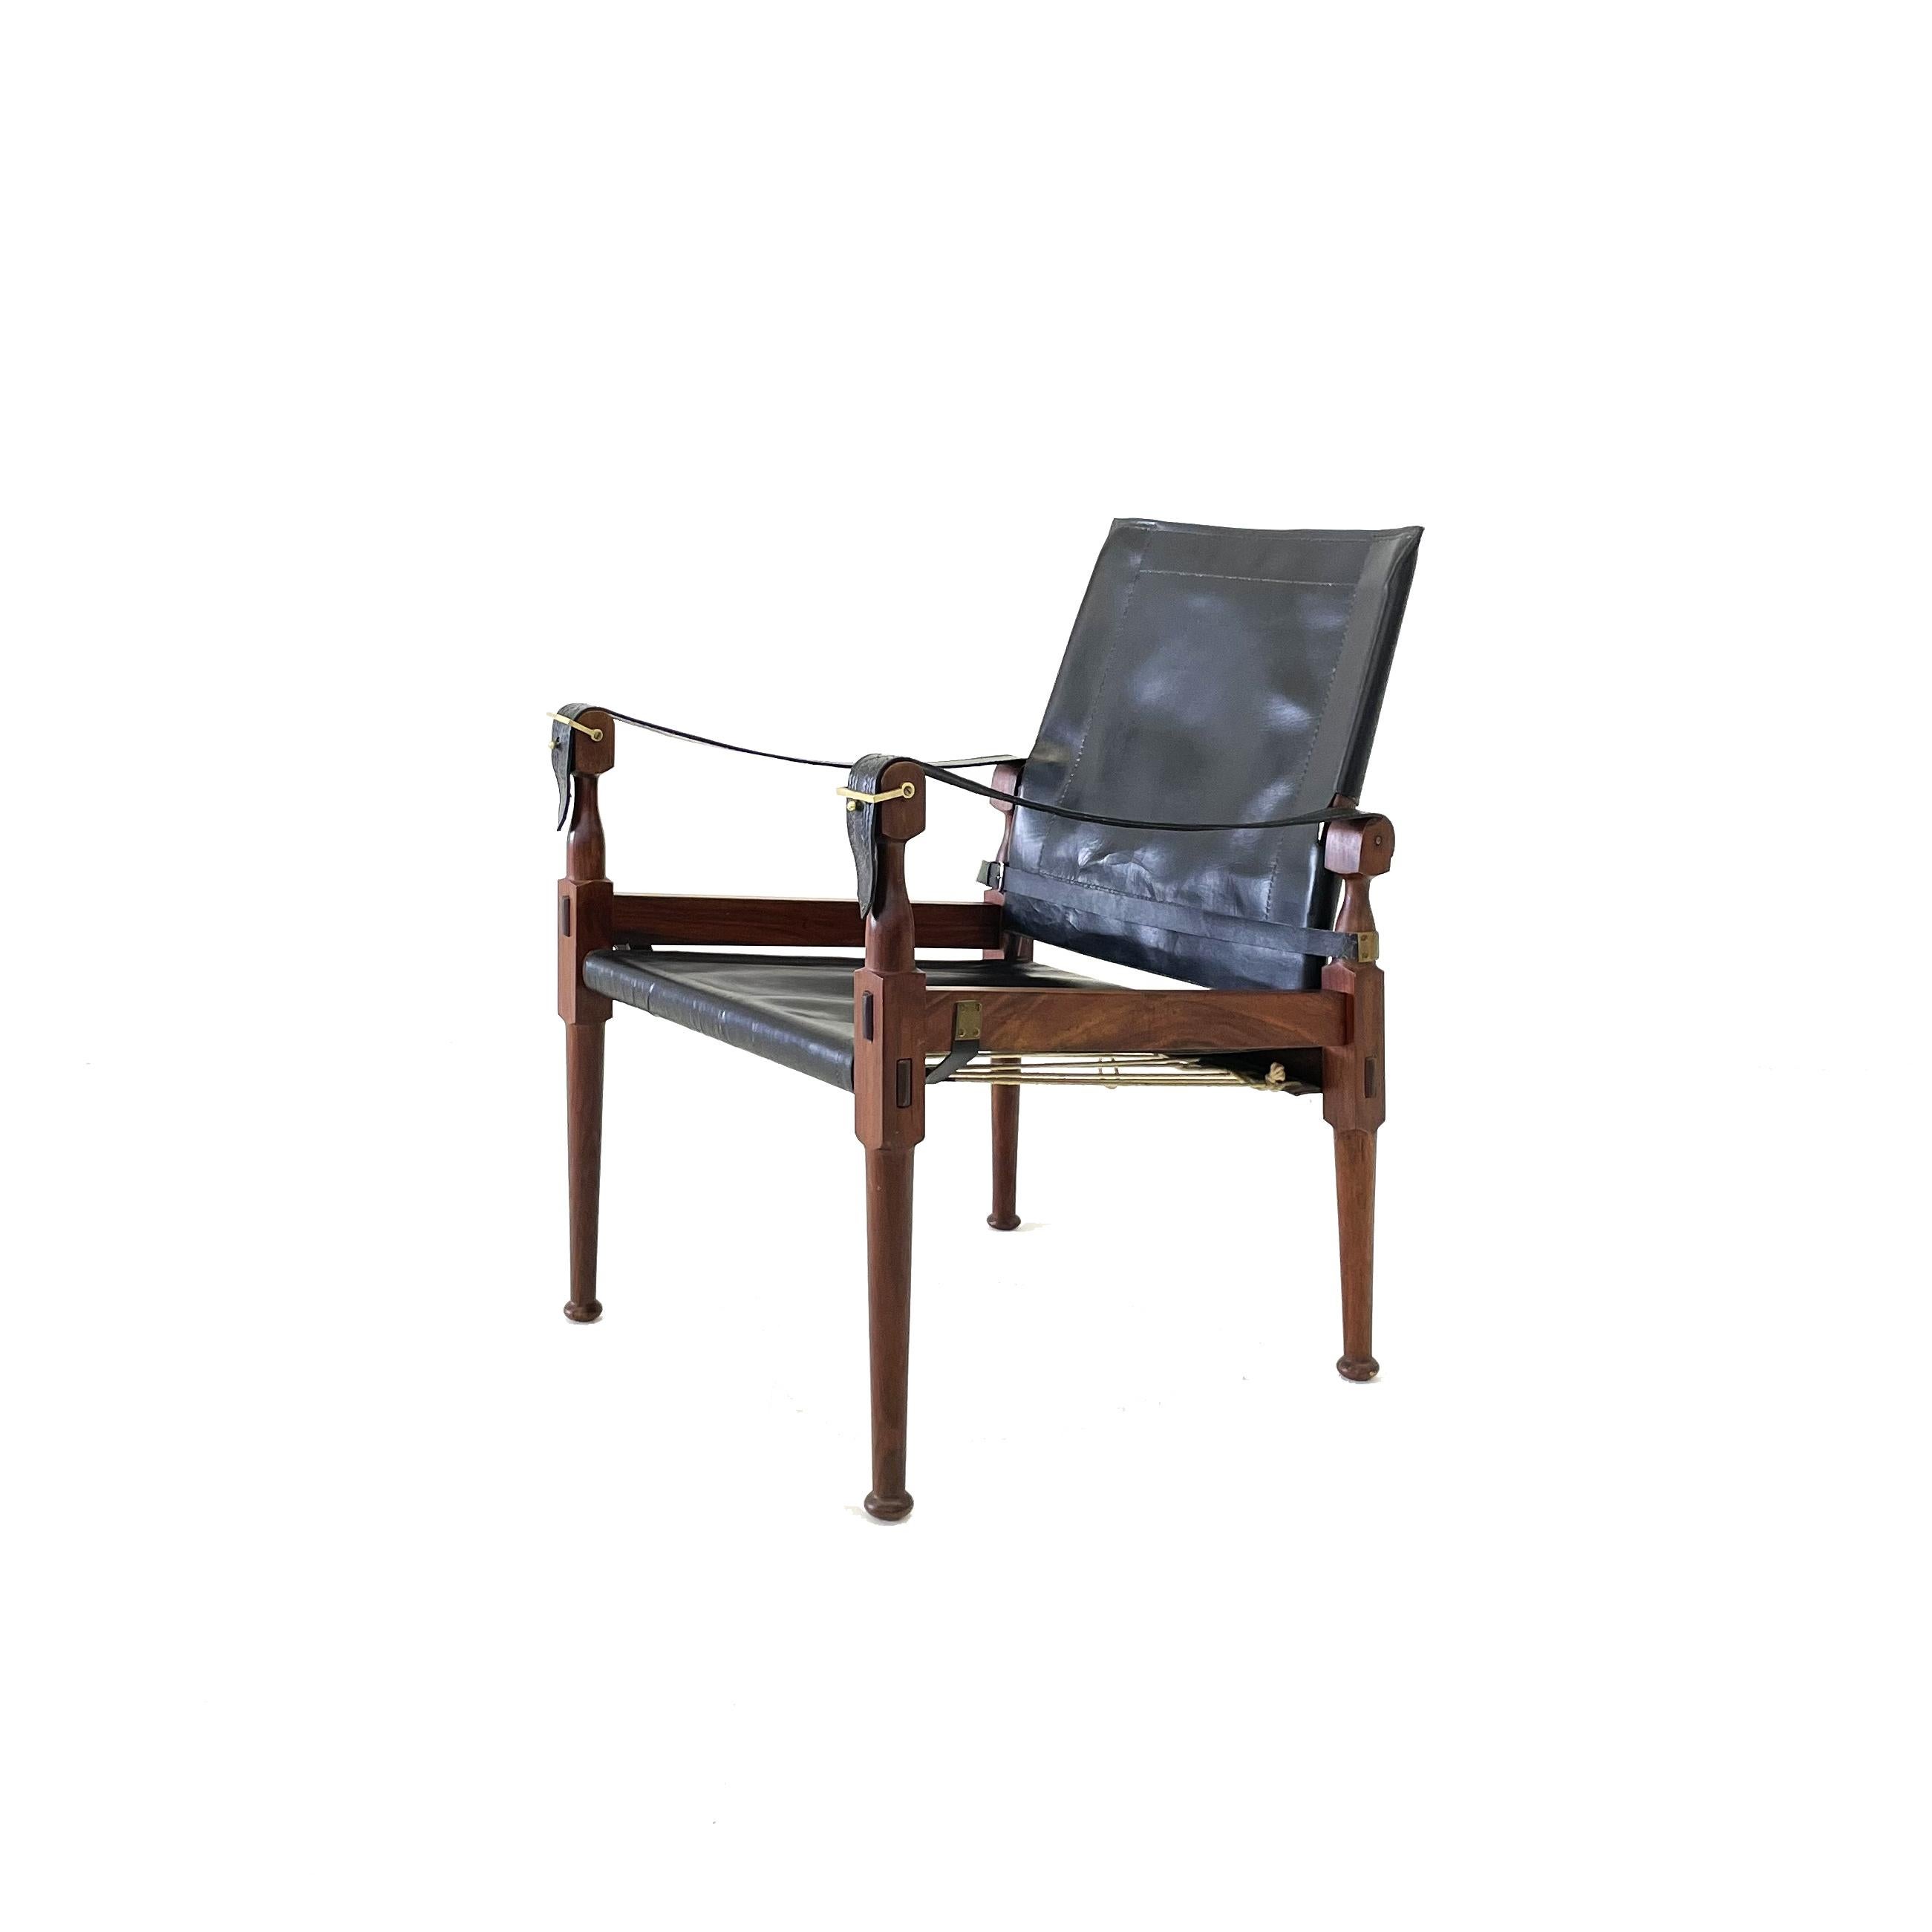 'Safari' lounge chair, wood, black leather and brass, Pakistan, 1970s

This 'Safari' armchair shows very elegant and well designed lines, in combination with carefully crafted wood joints. The black leather with multiple straps completes this